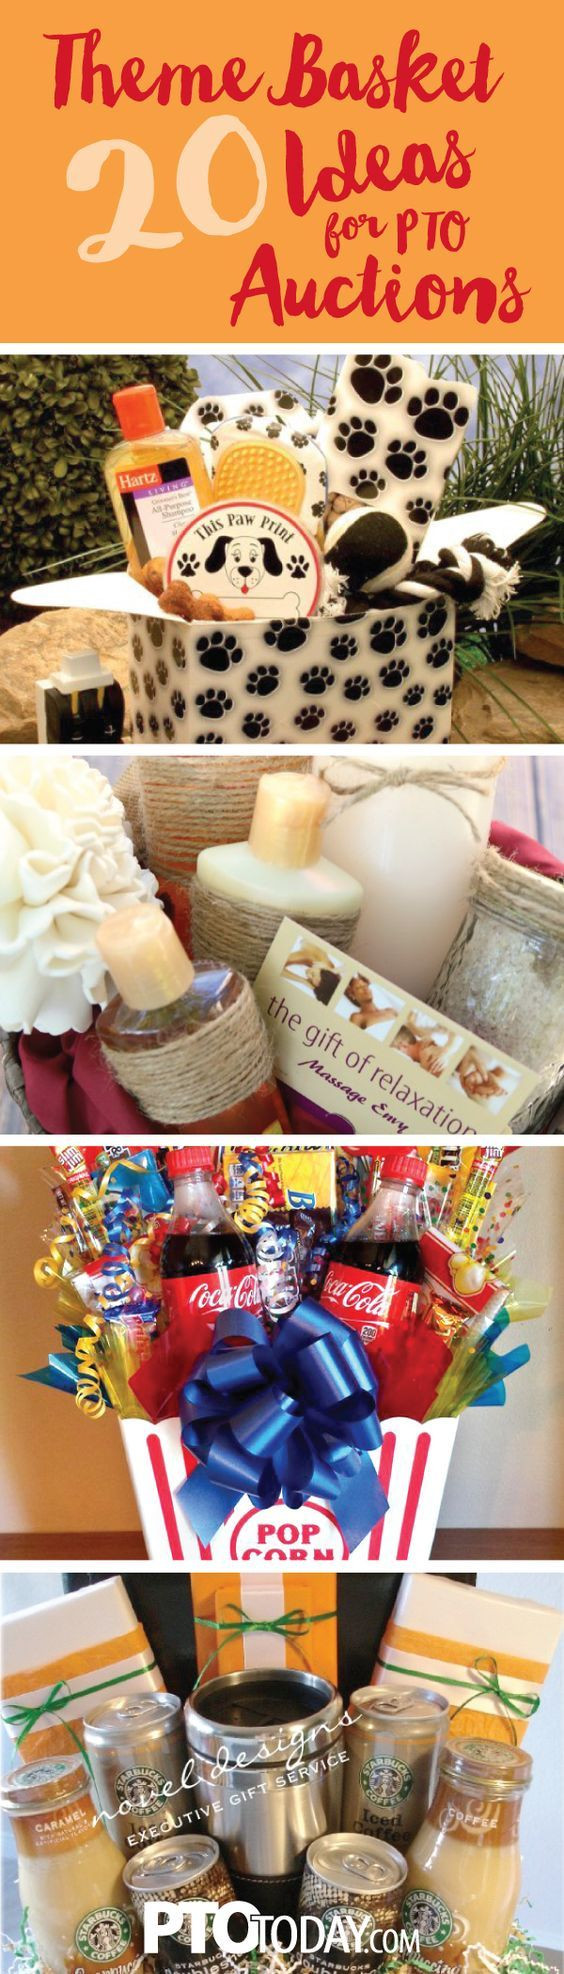 Themed Gift Basket Ideas For Auctions
 20 Ideas for Theme Baskets for PTOs and PTAs